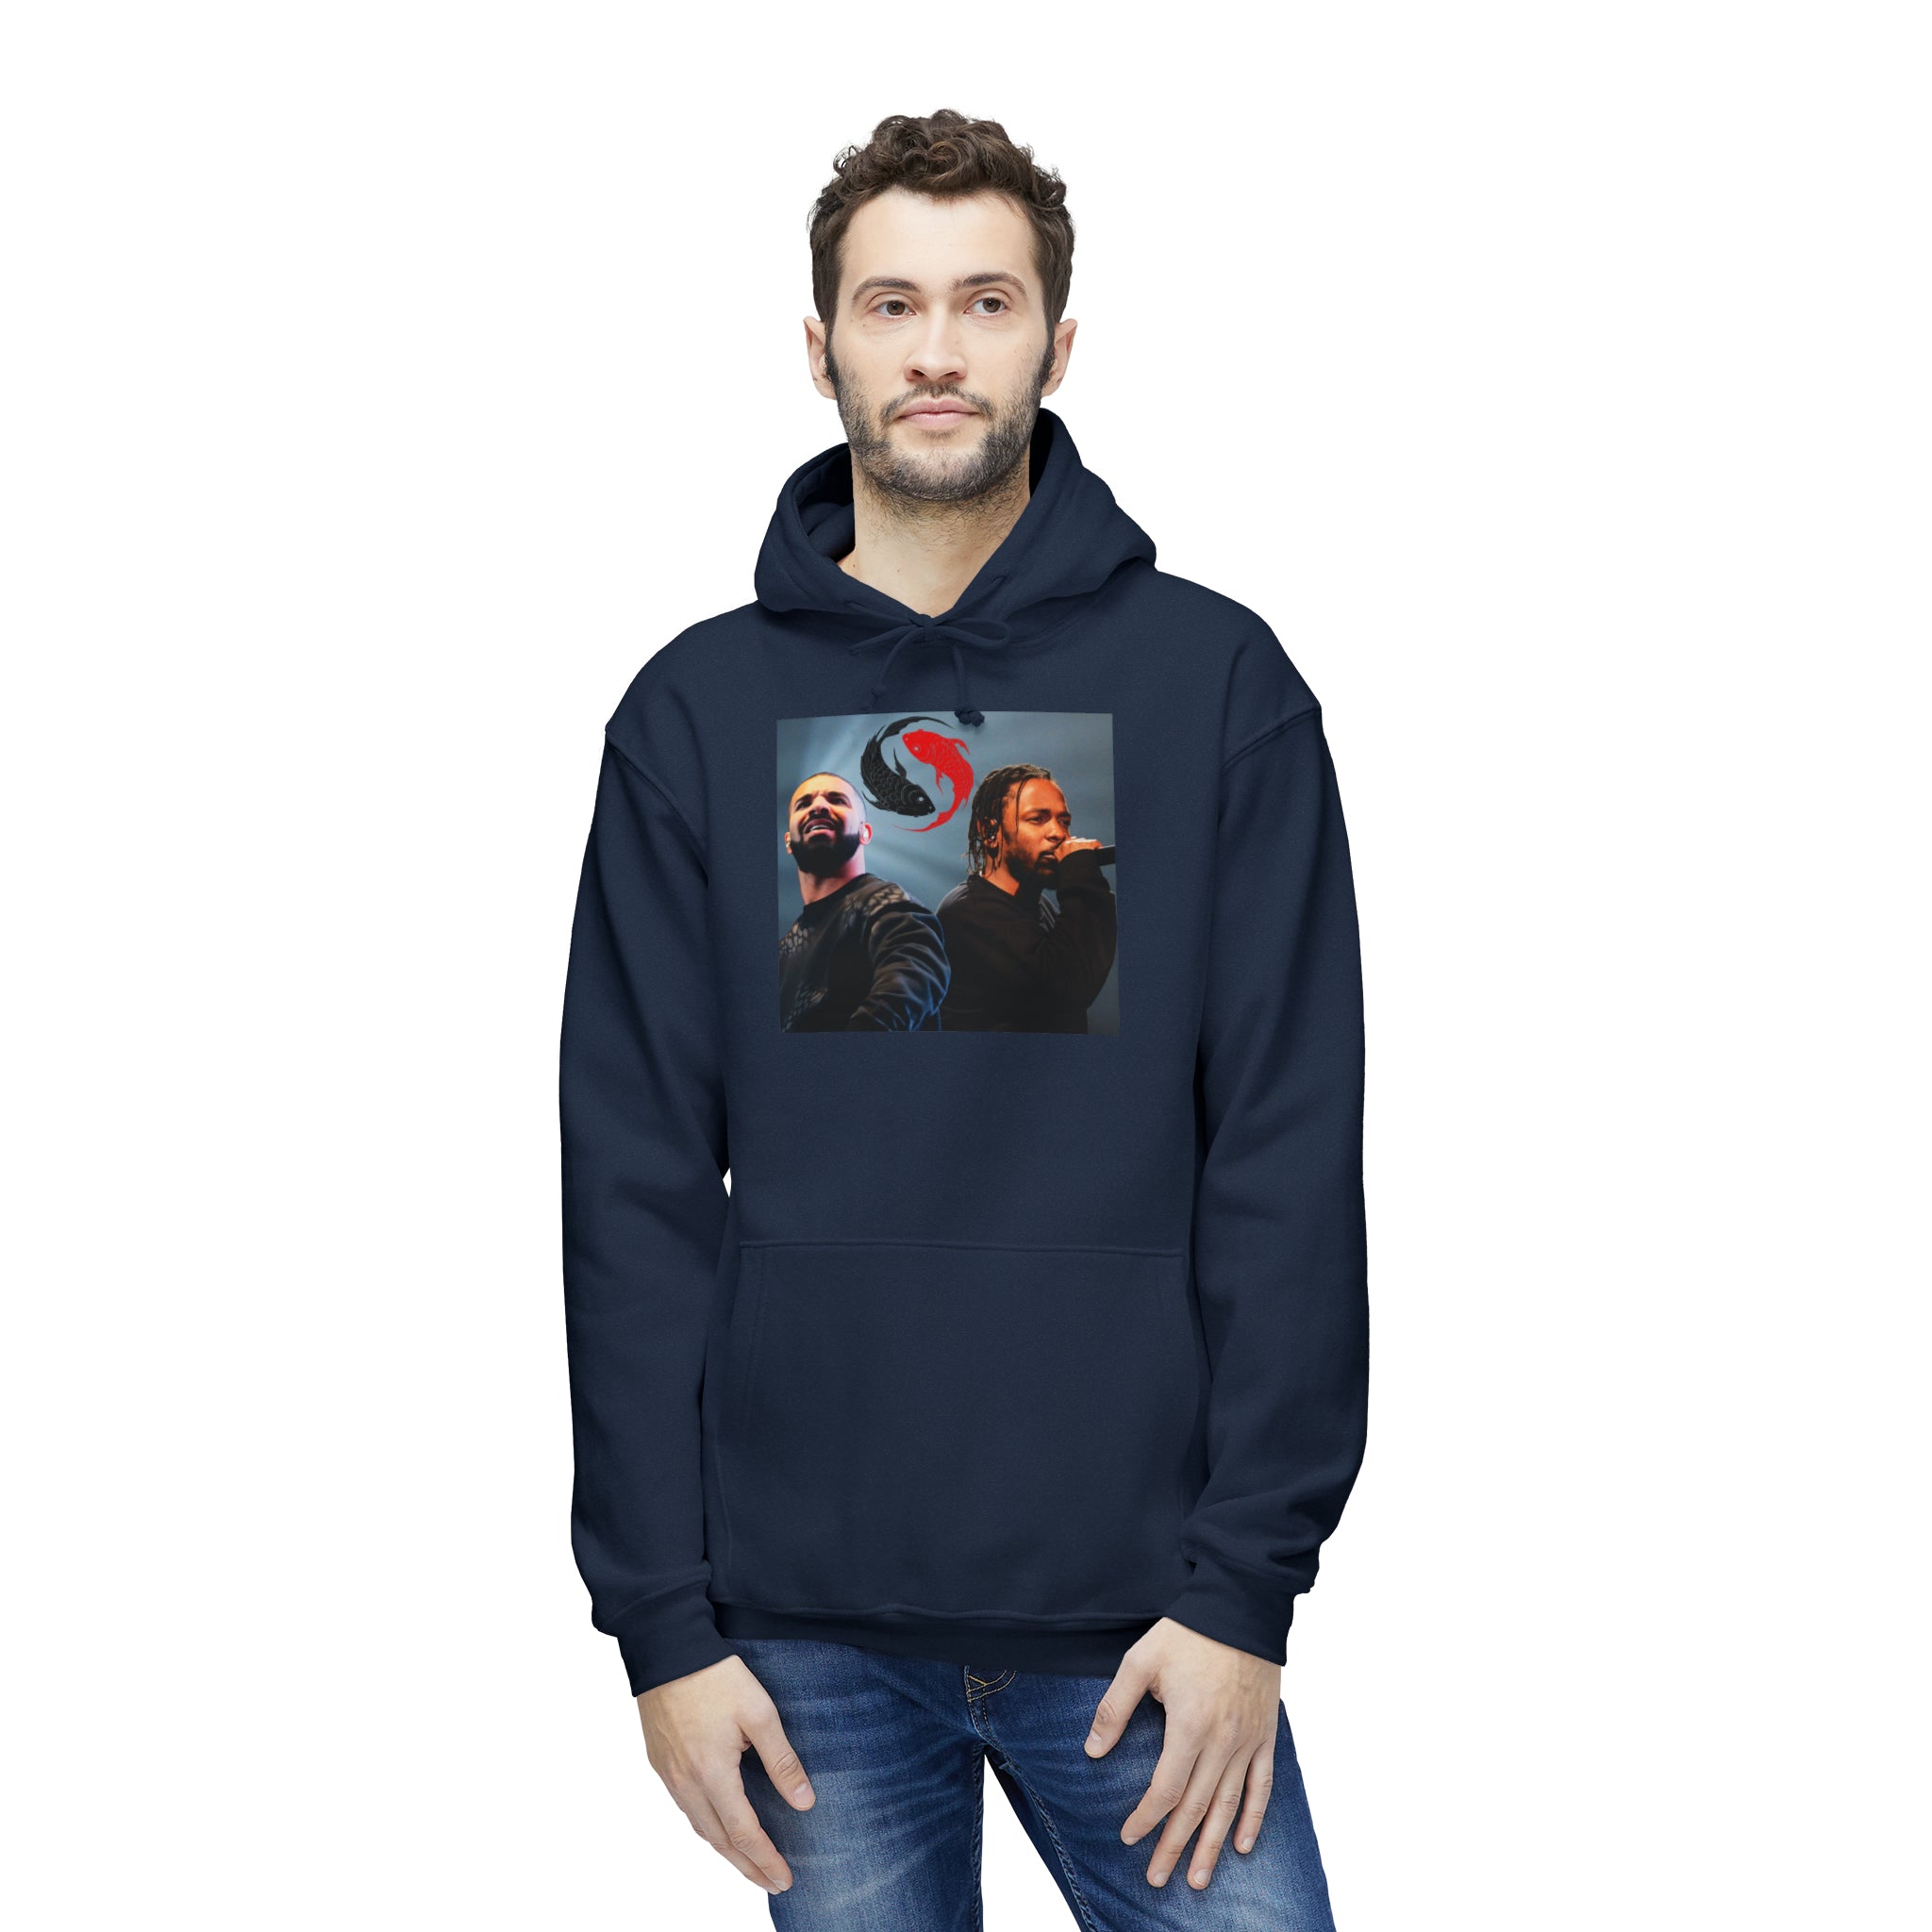 The image presents a cozy, unisex hooded sweatshirt featuring the captivating "Yin and Yang Beef - Drizzy vs. Lamar" design. Made with attention to detail and quality in the US, the hoodie captures the essence of hip-hop rivalry turned mutual admiration, set against a backdrop of soft, durable fabric that promises both style and comfort.